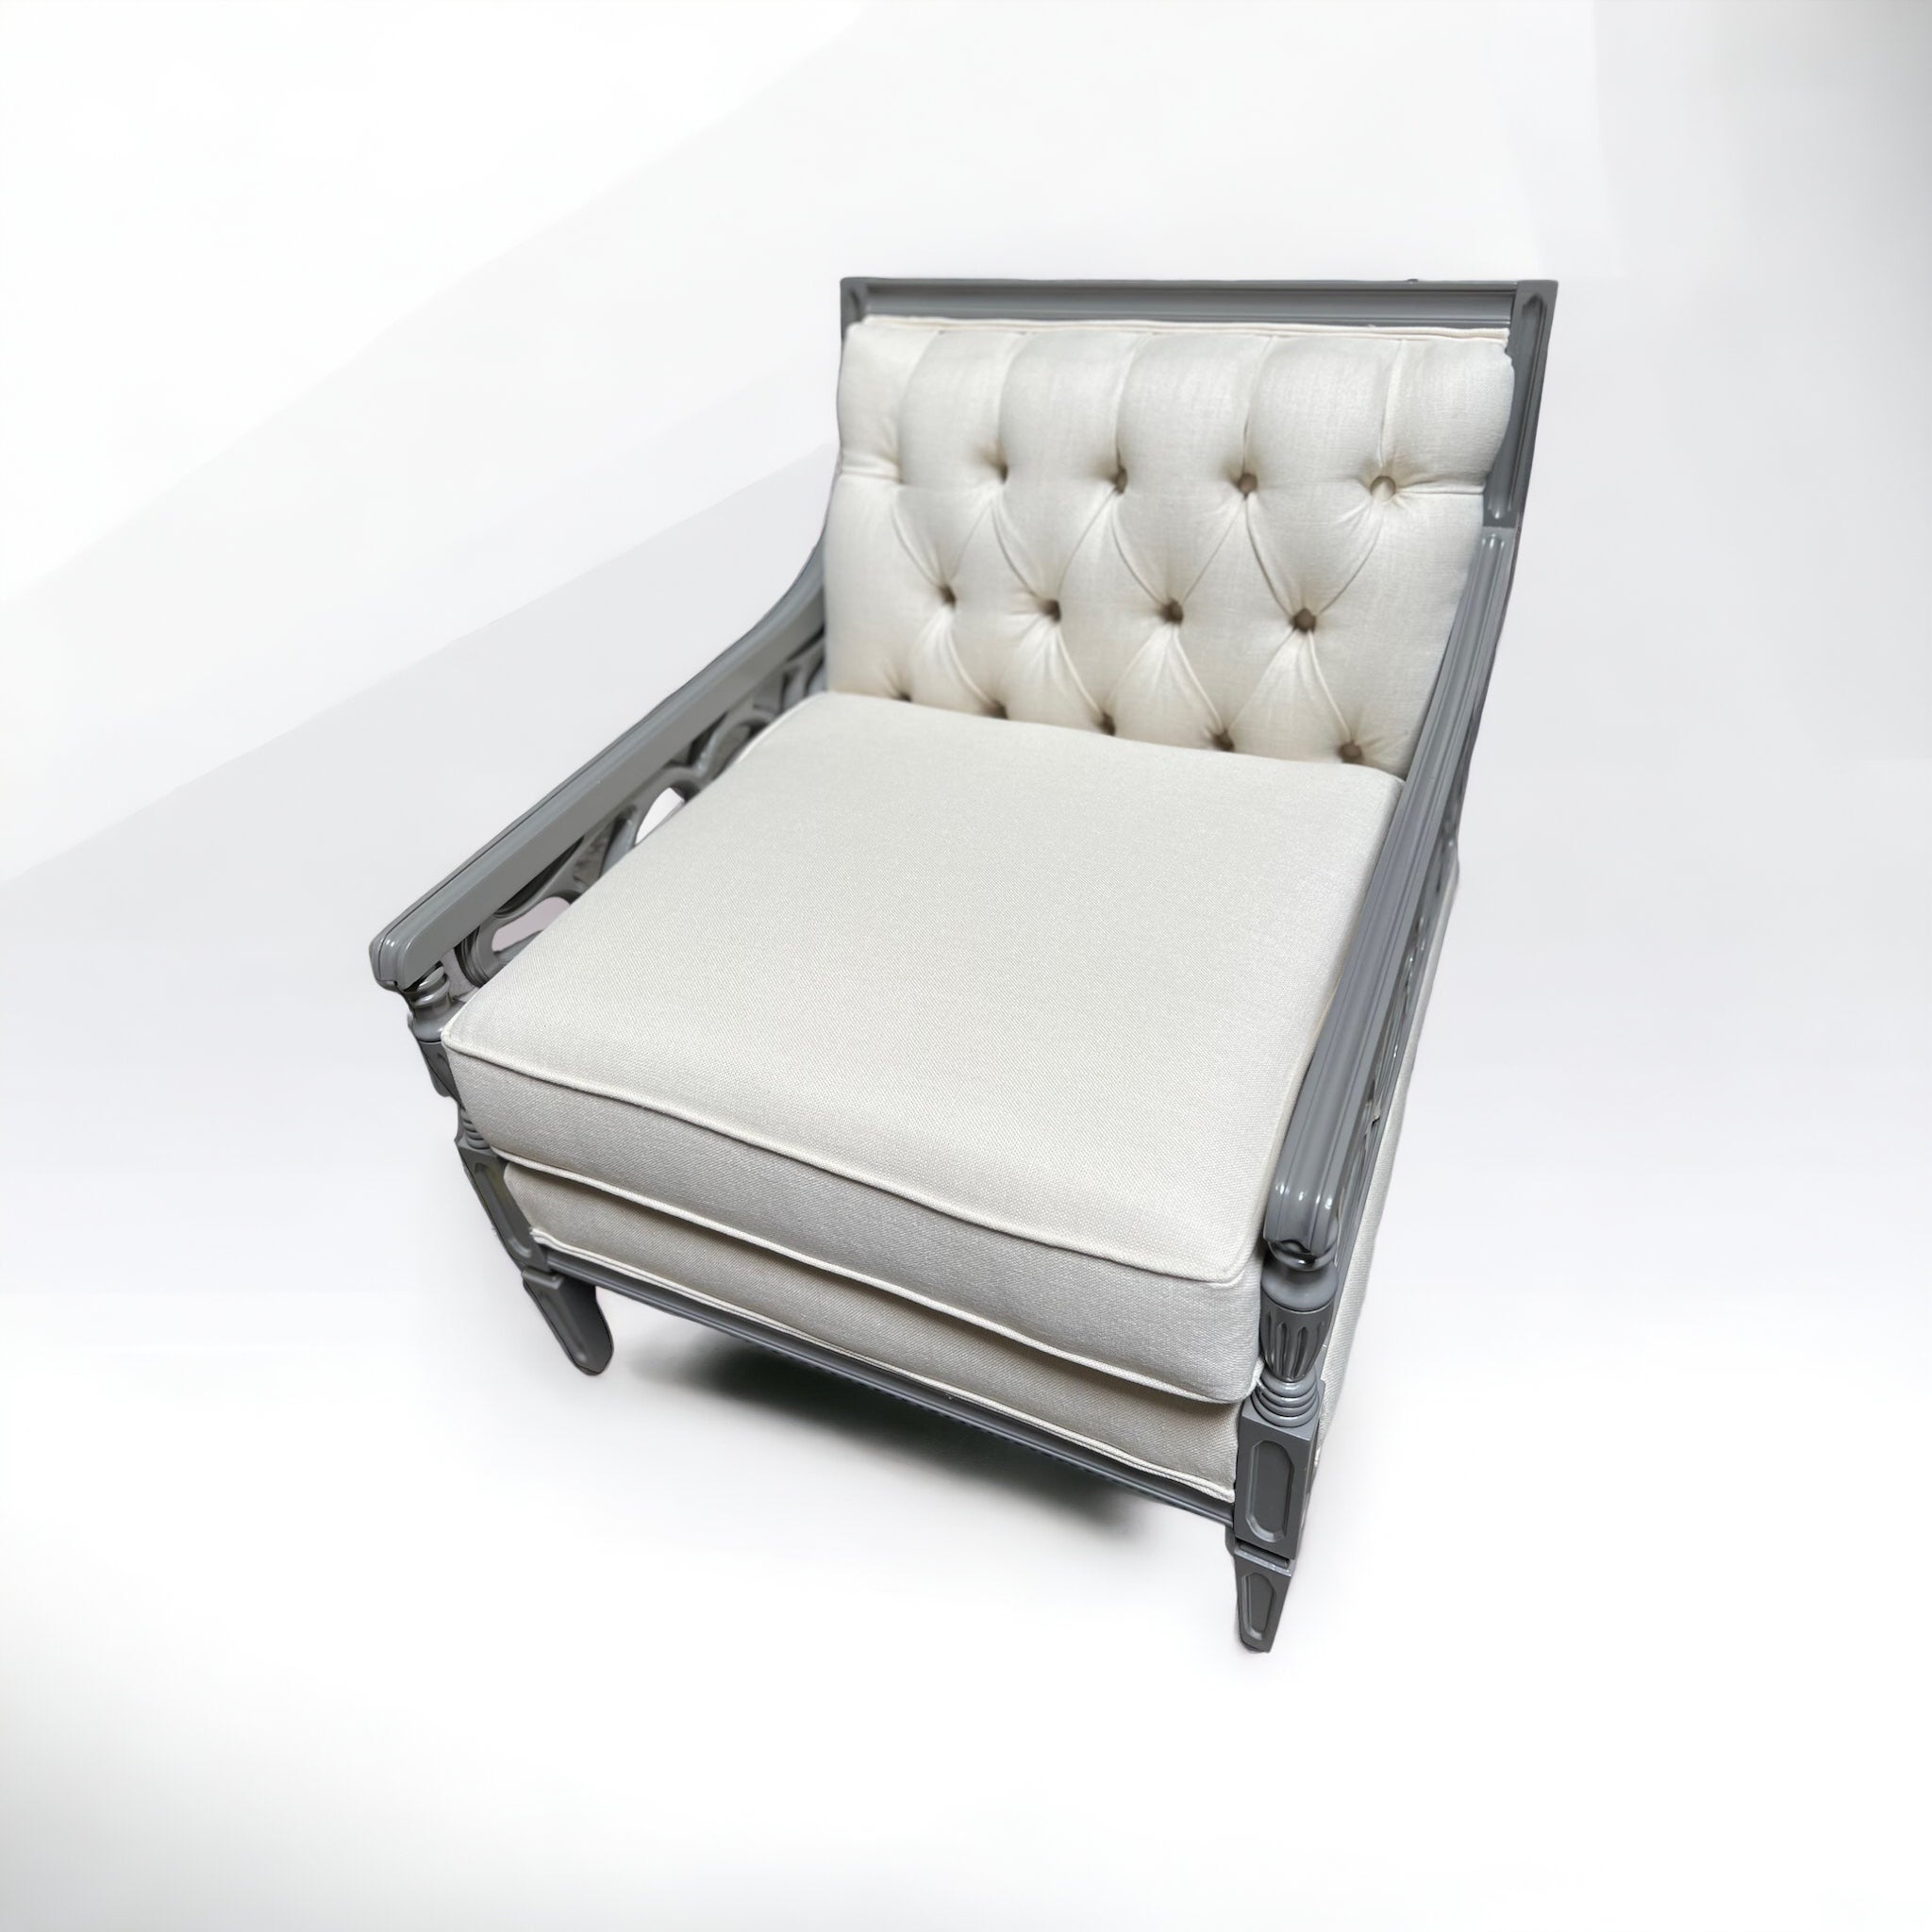 Fretwork Grey Lacquered Chairs (pair)